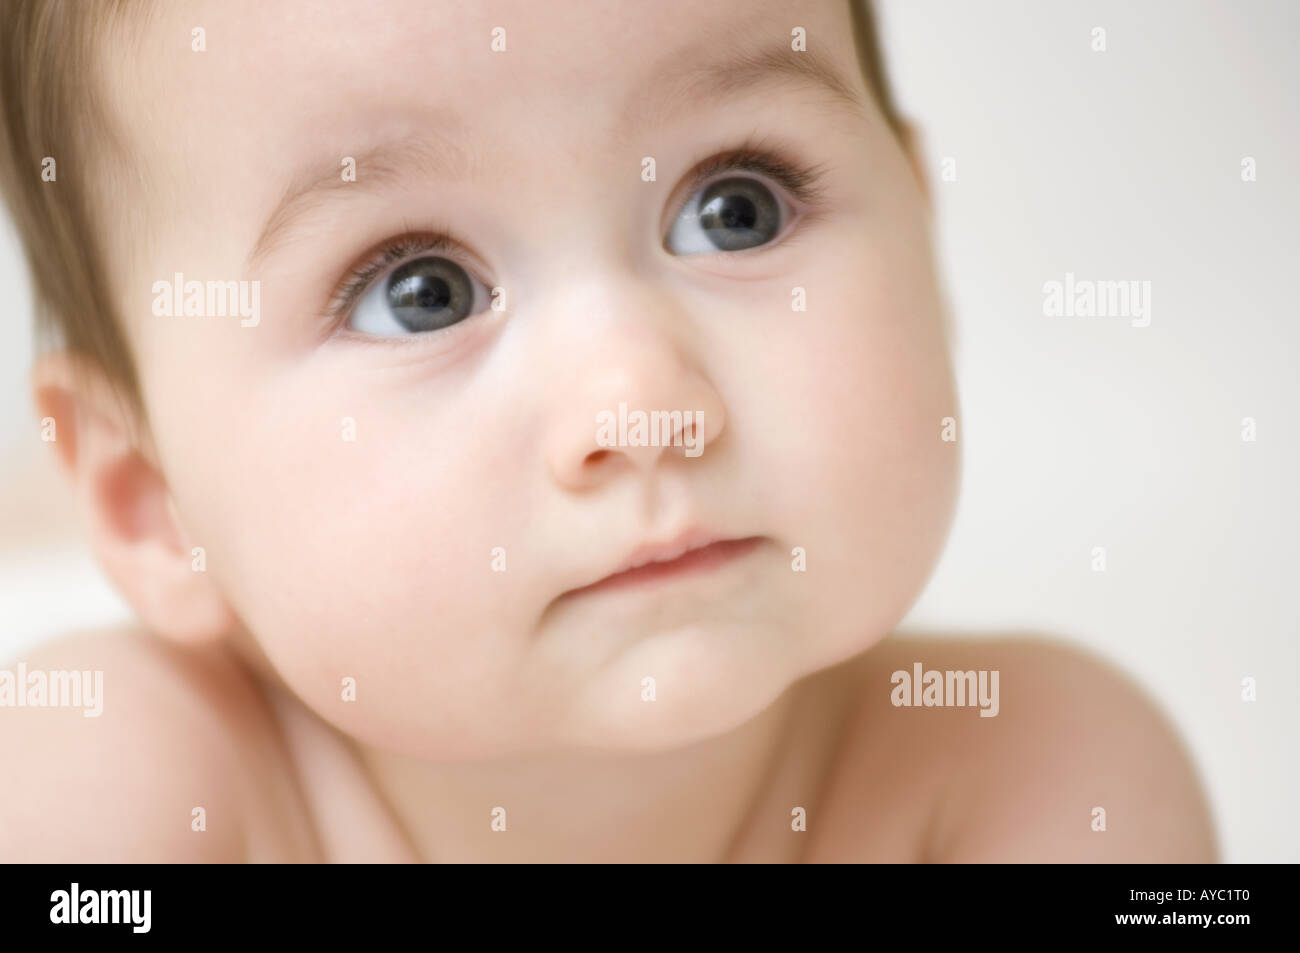 6 month old caucasian baby girl with  big brown eyes and pensive expression. Stock Photo